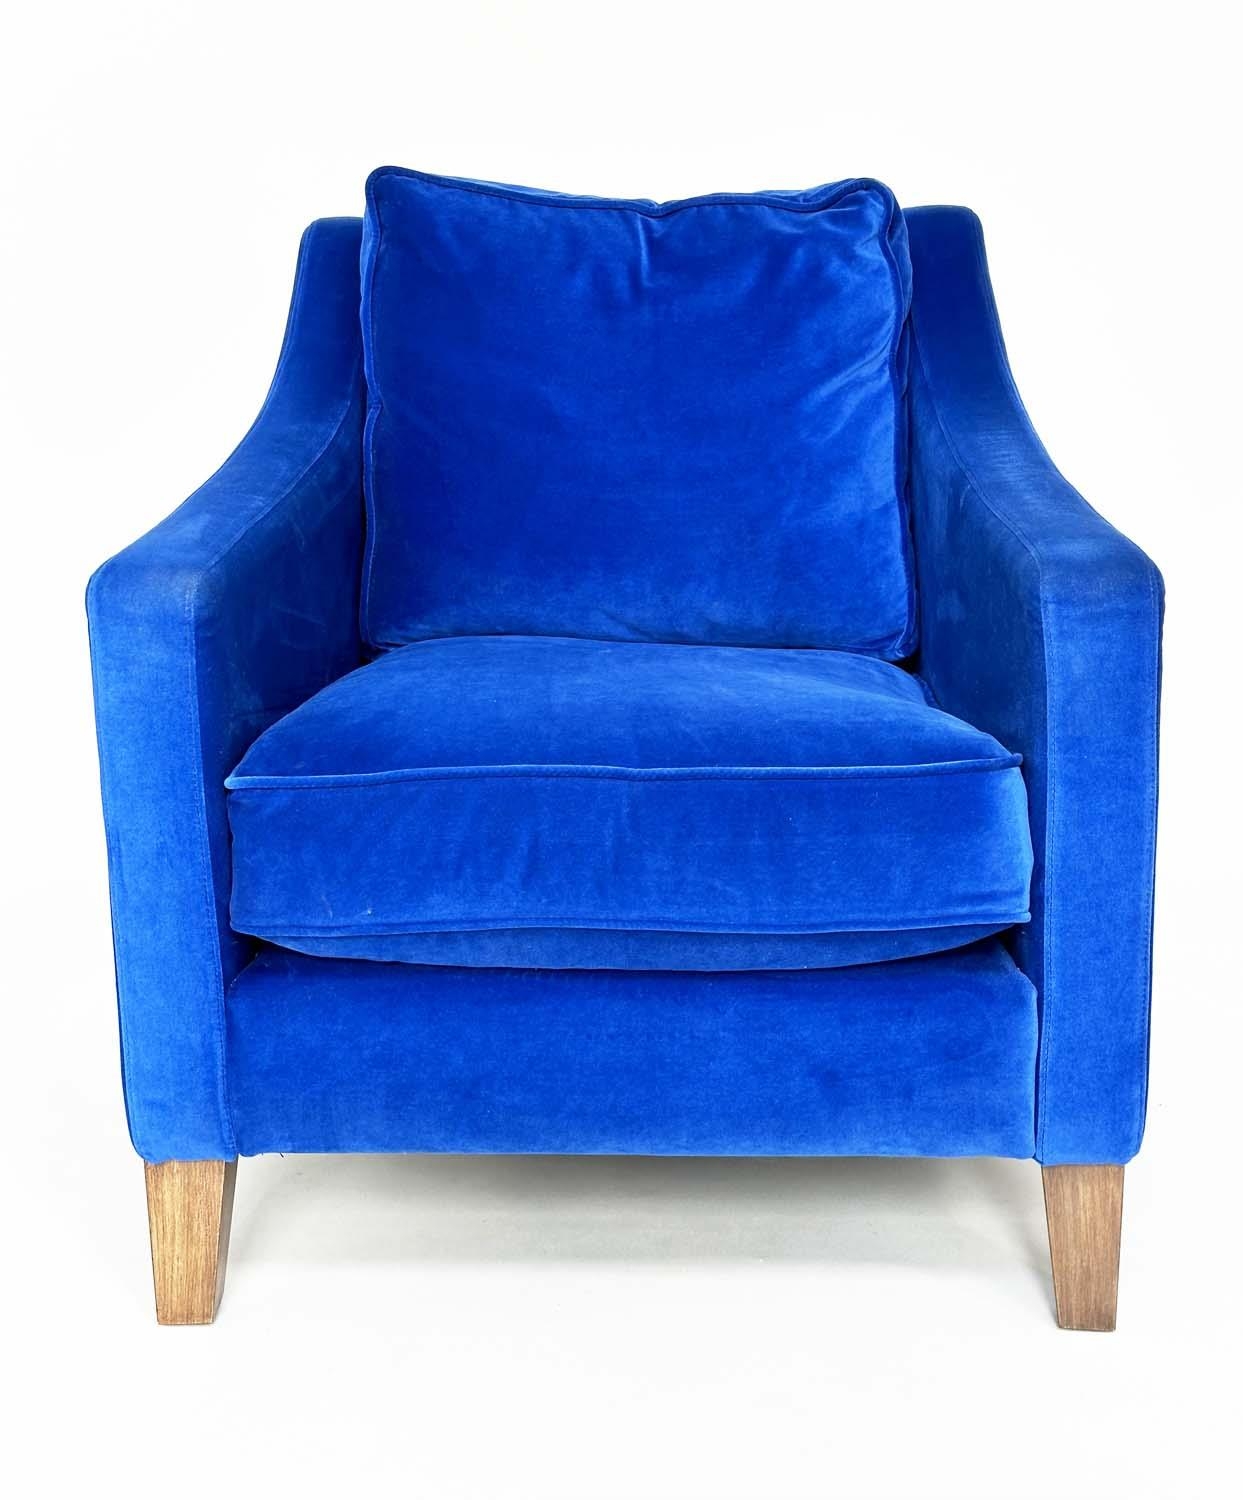 ARMCHAIR, traditional, blue velvet upholstered with soft cushions and tapering supports, Sofa.com, - Image 8 of 11